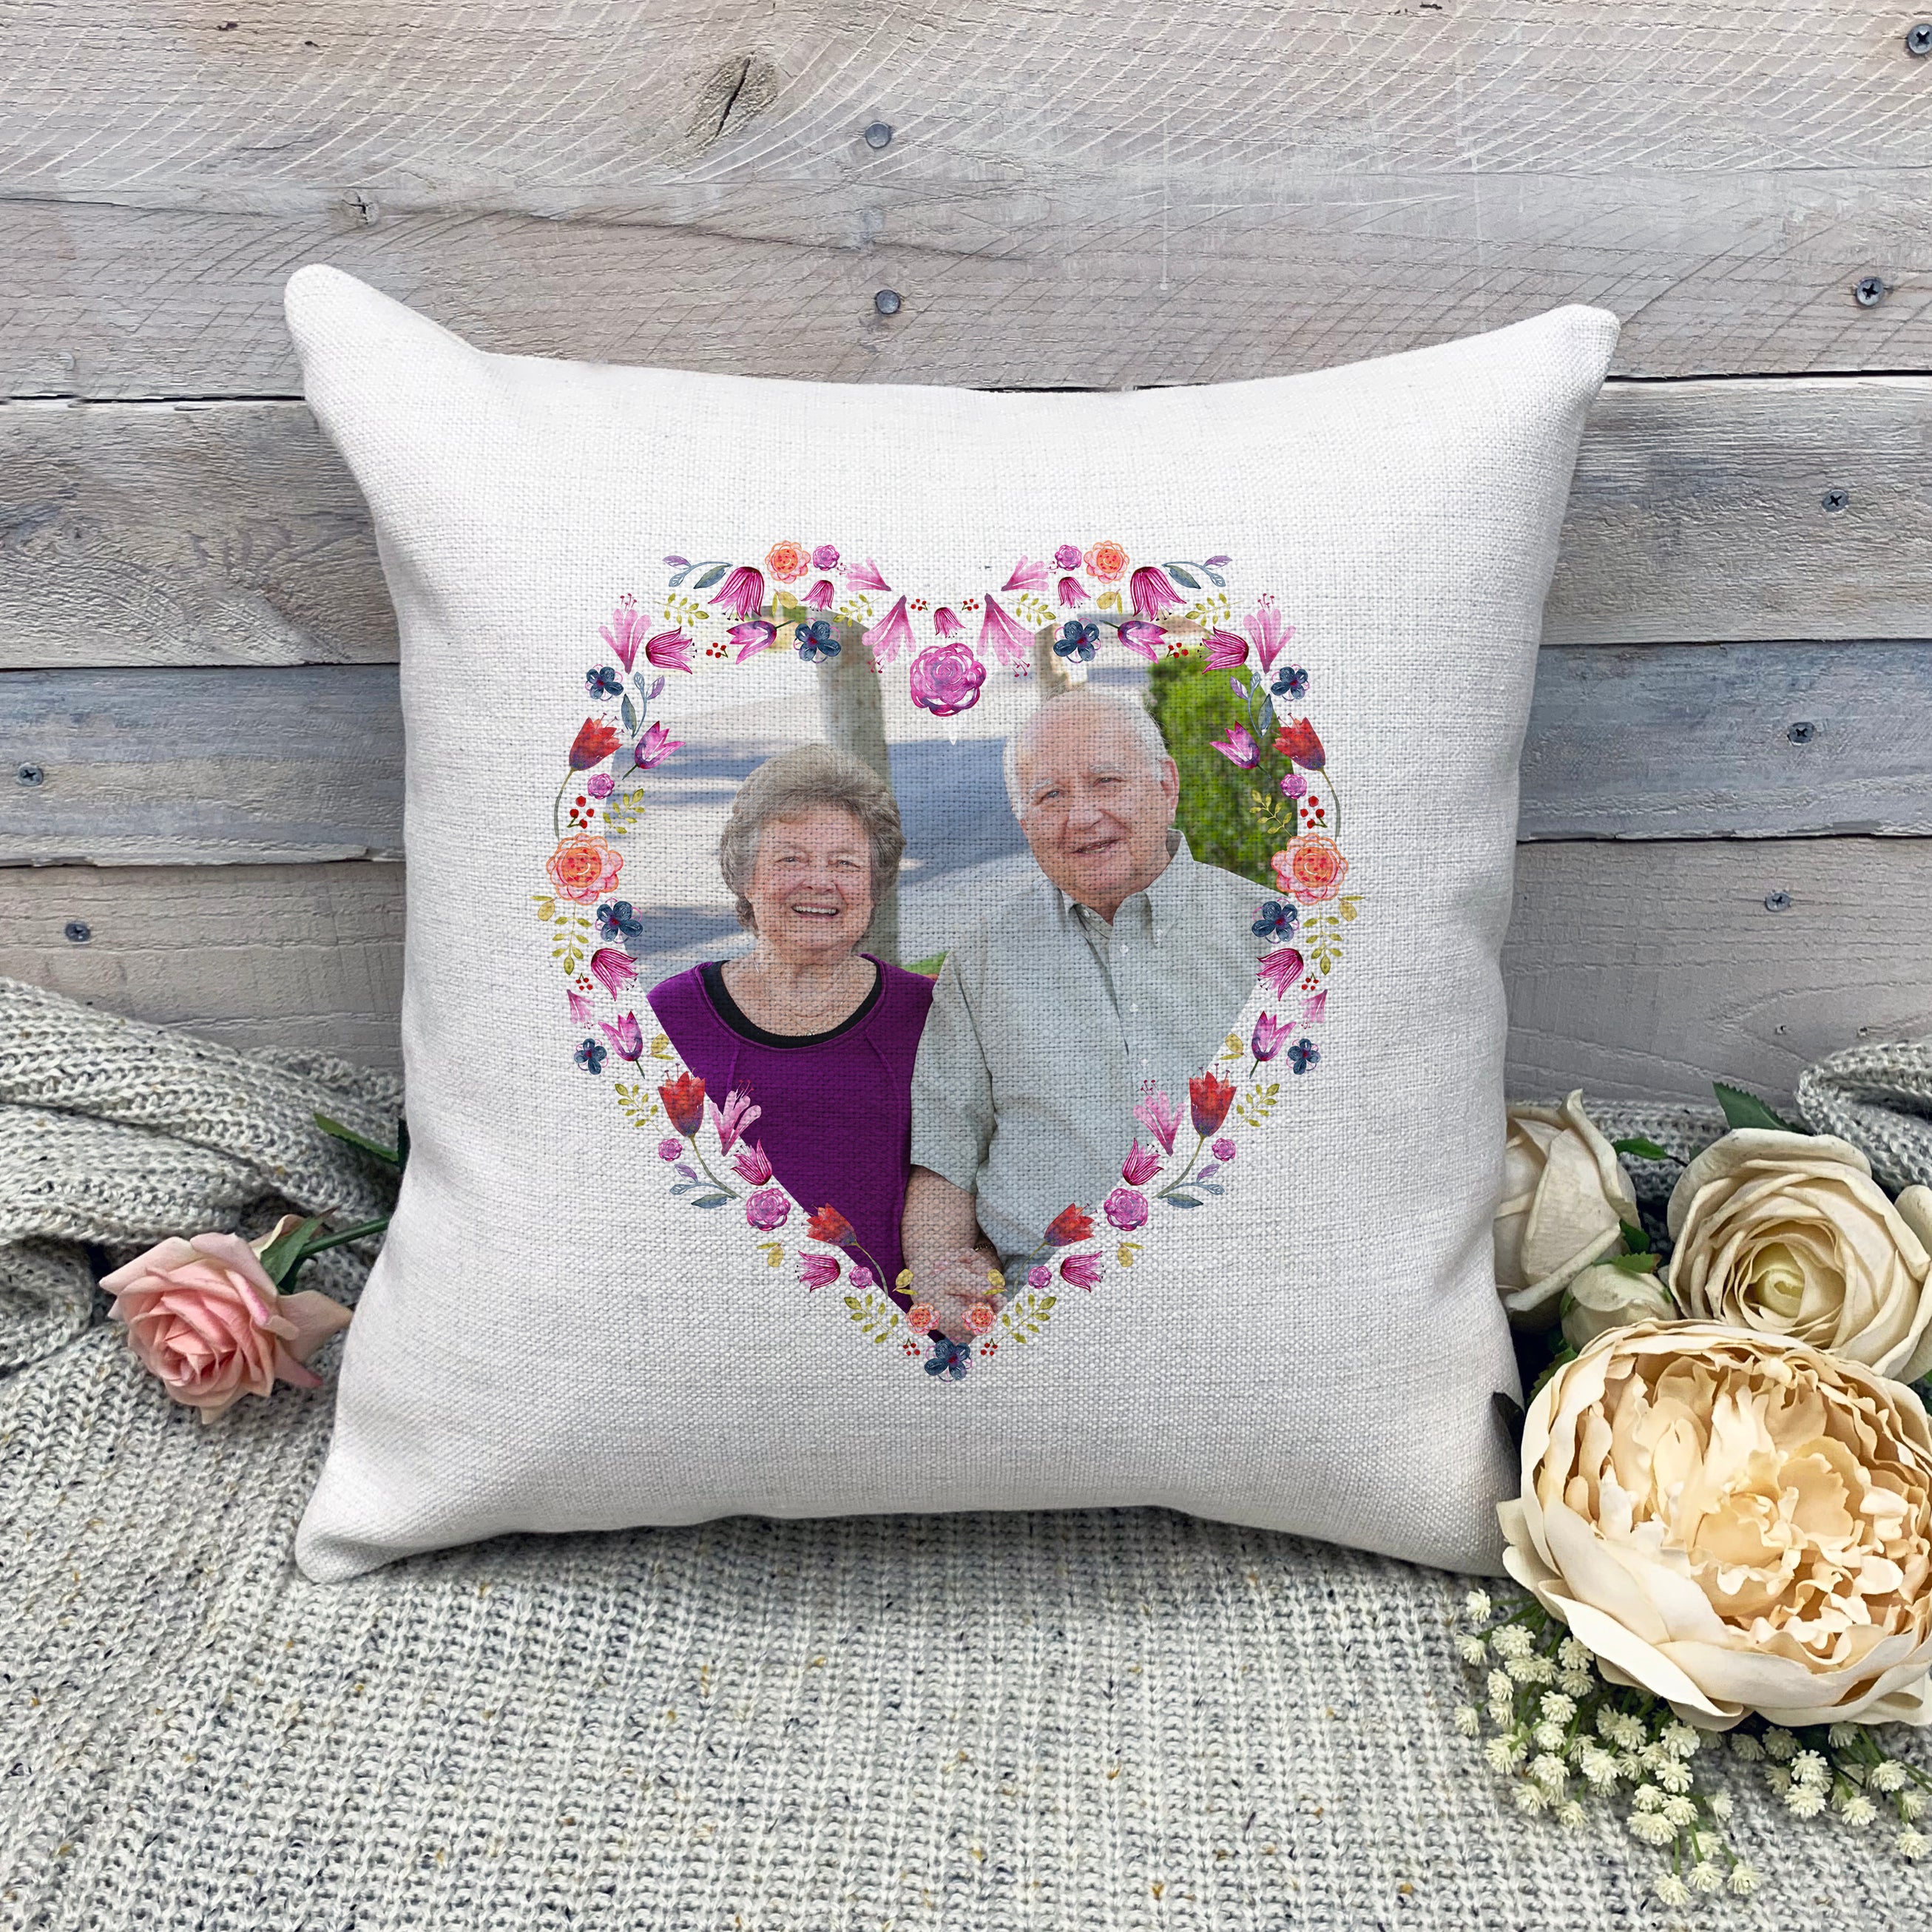 Custom Pillowcases. Personalized Pillowcases With Your Photos